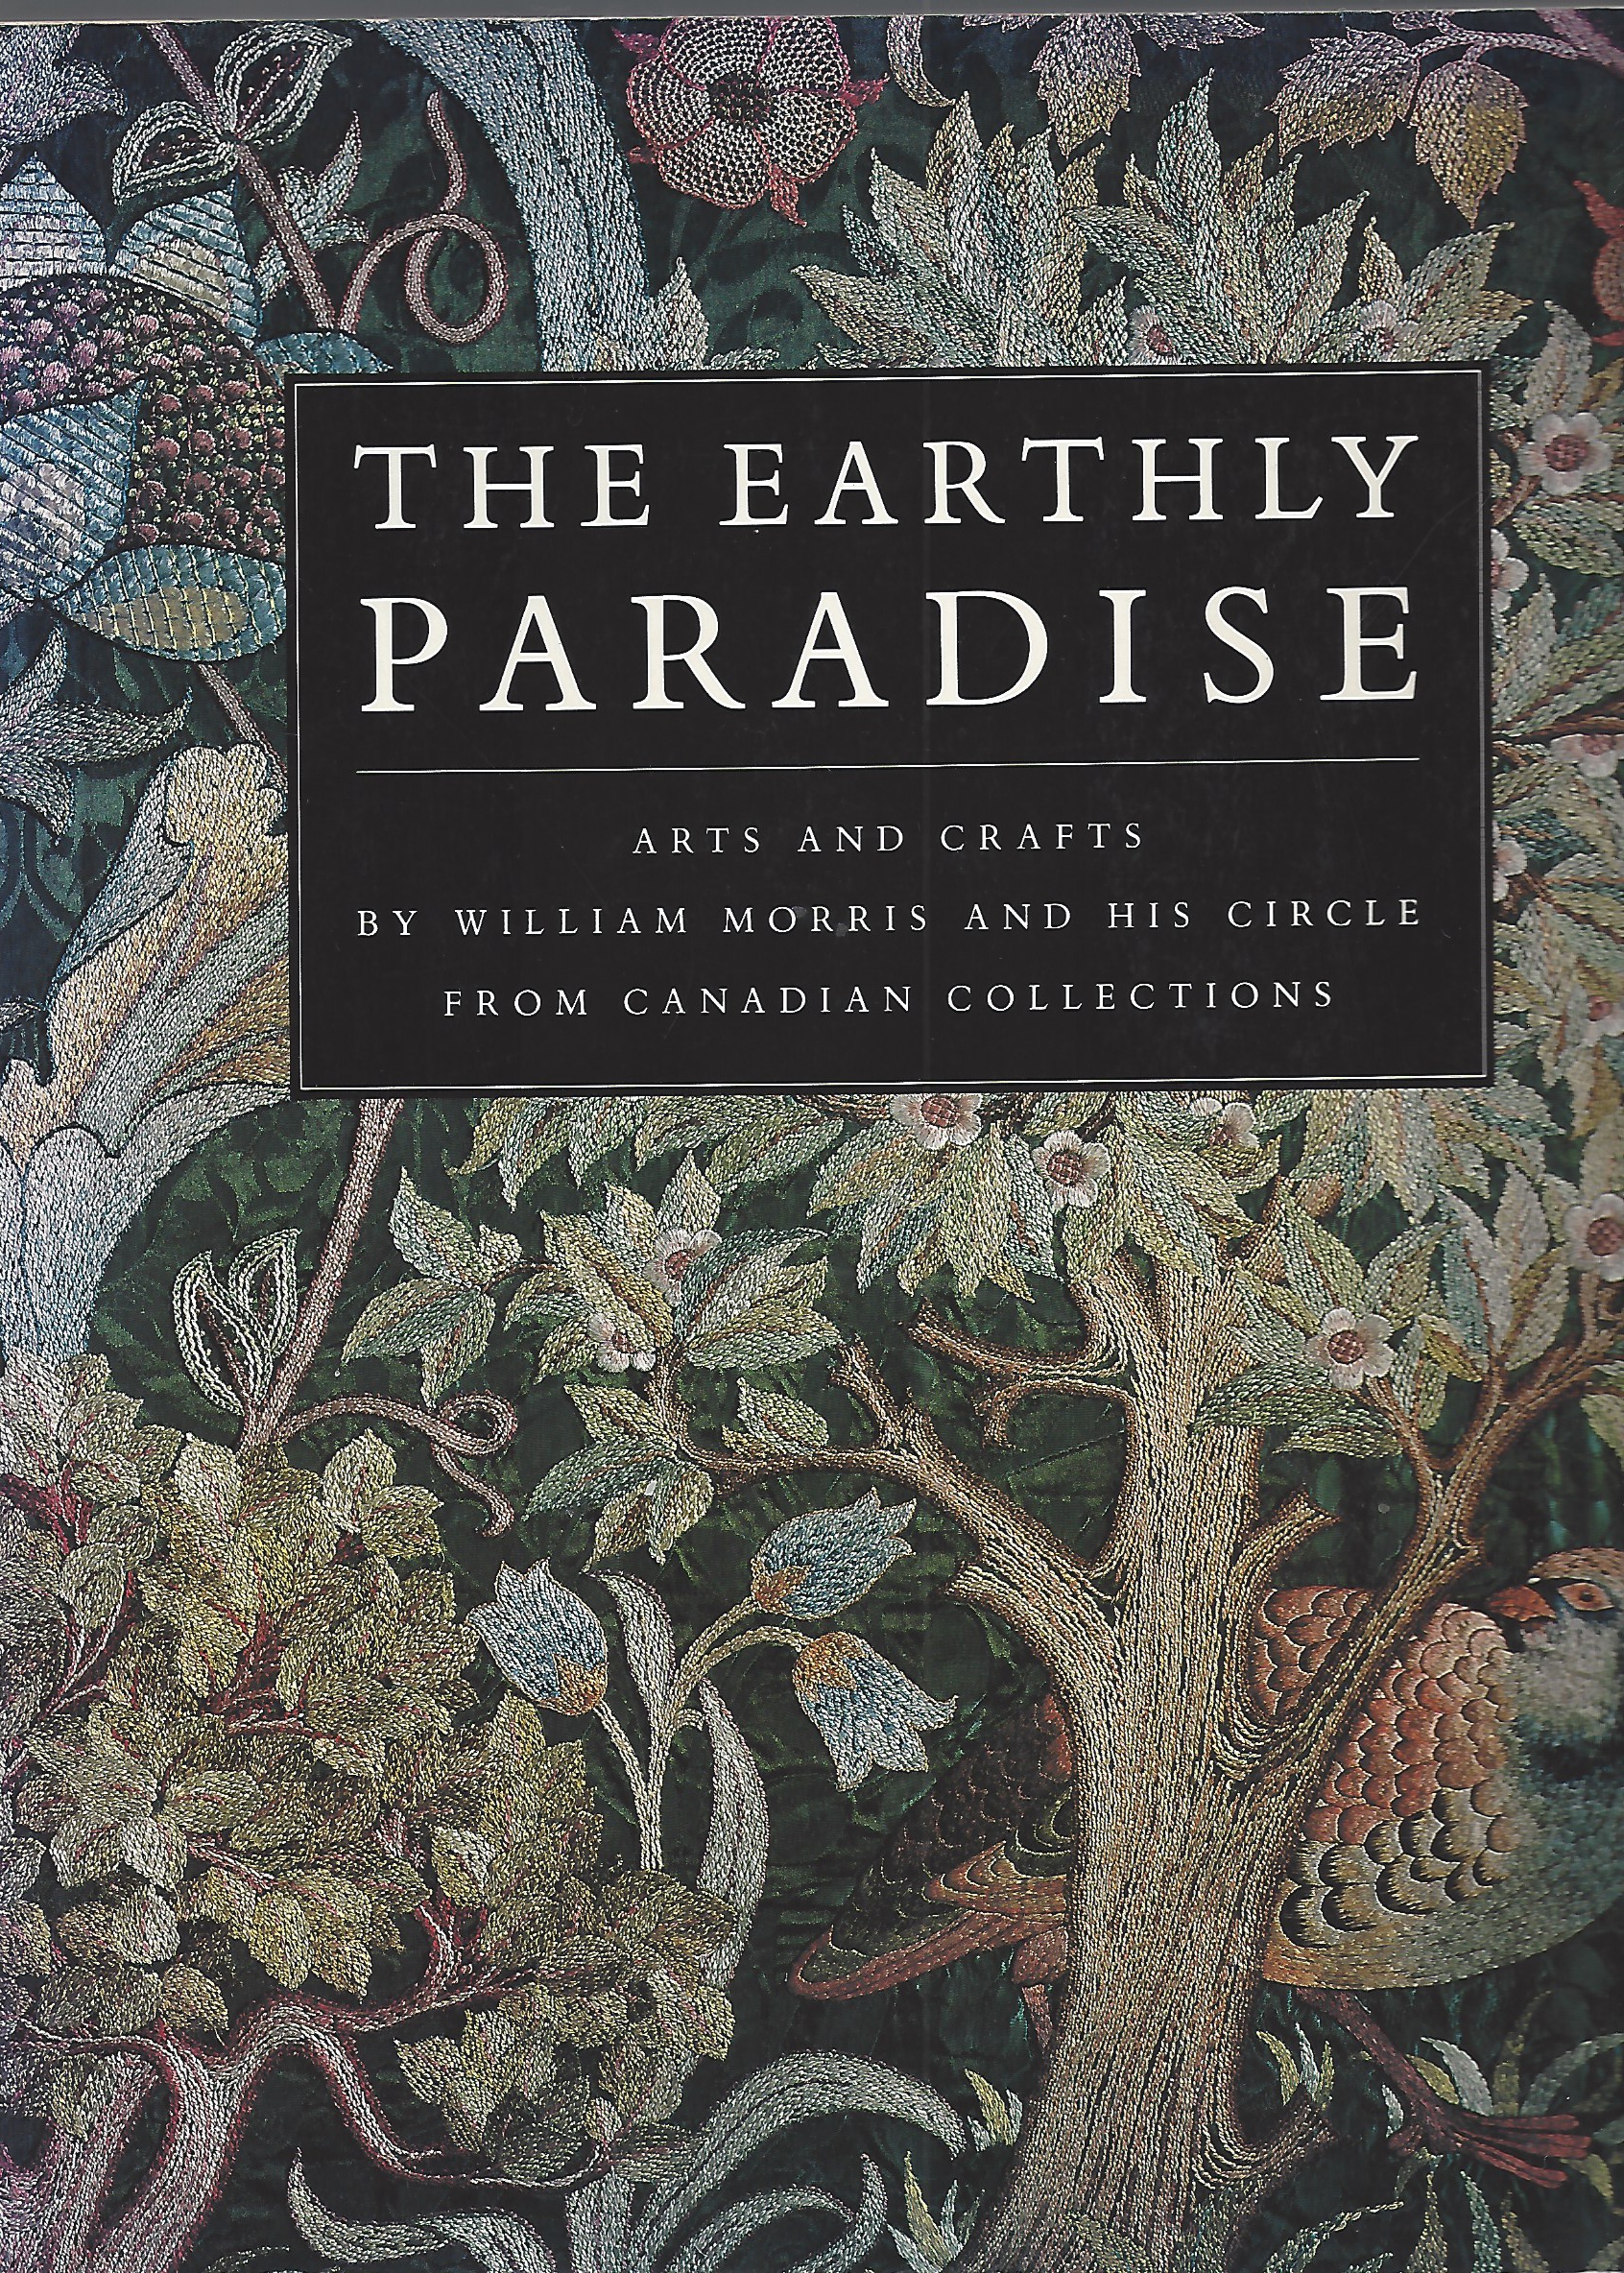 MORRIS WILLIAM - Earthly Paradise, Arts and Crafts by William Morris and His Circle from Canadian Collections